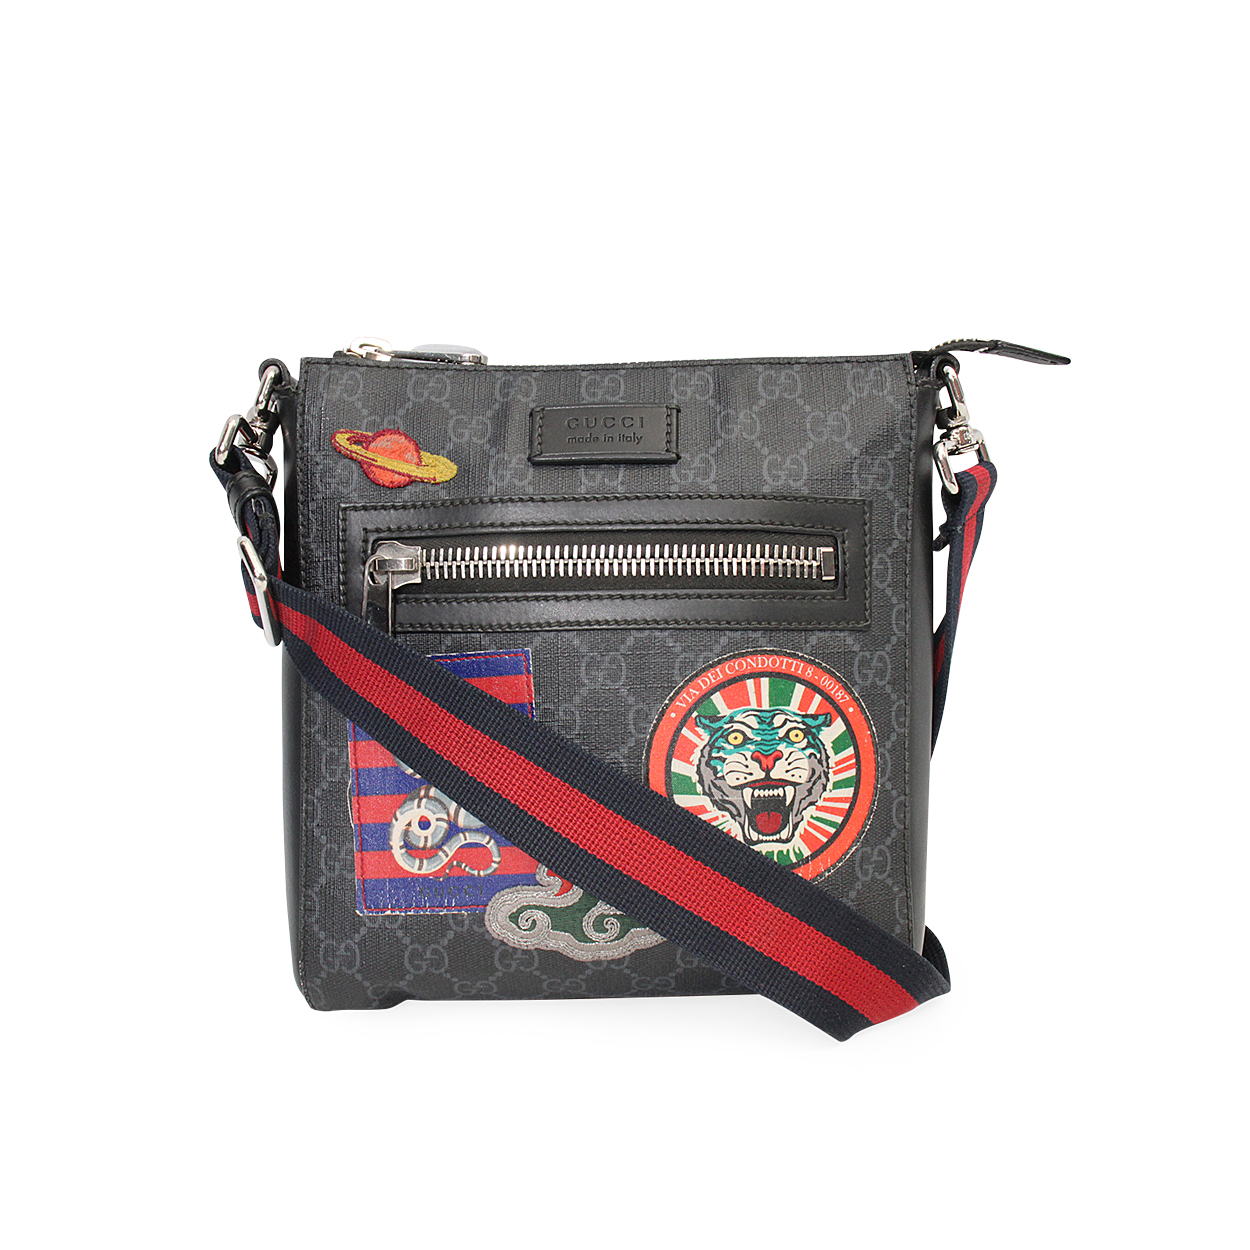 GUCCI GG Supreme Night Courrier Messenger Black | Luxity